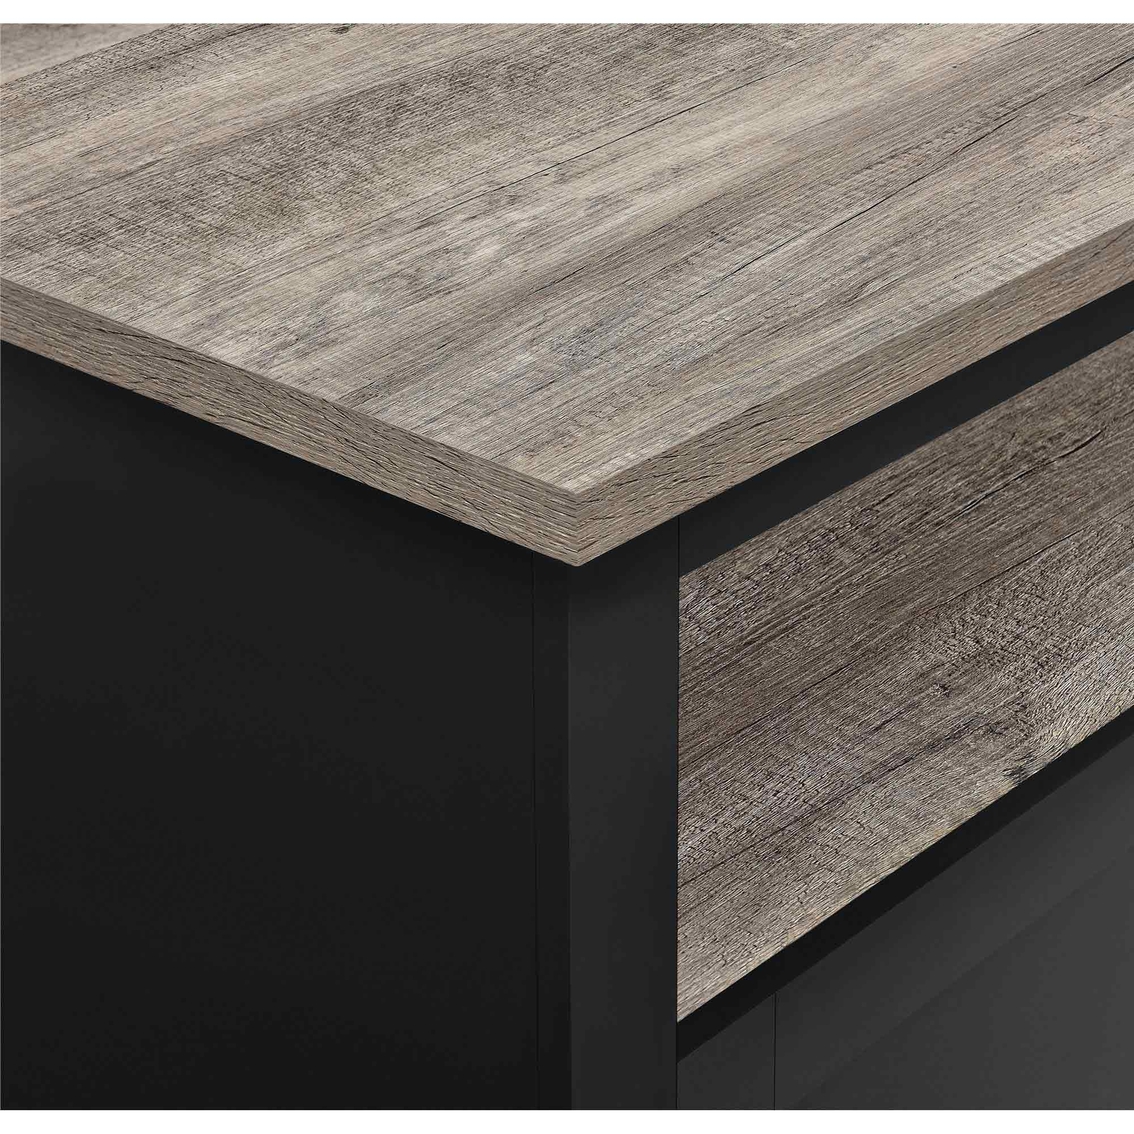 Altra Carver Coffee Table - Image 3 of 3